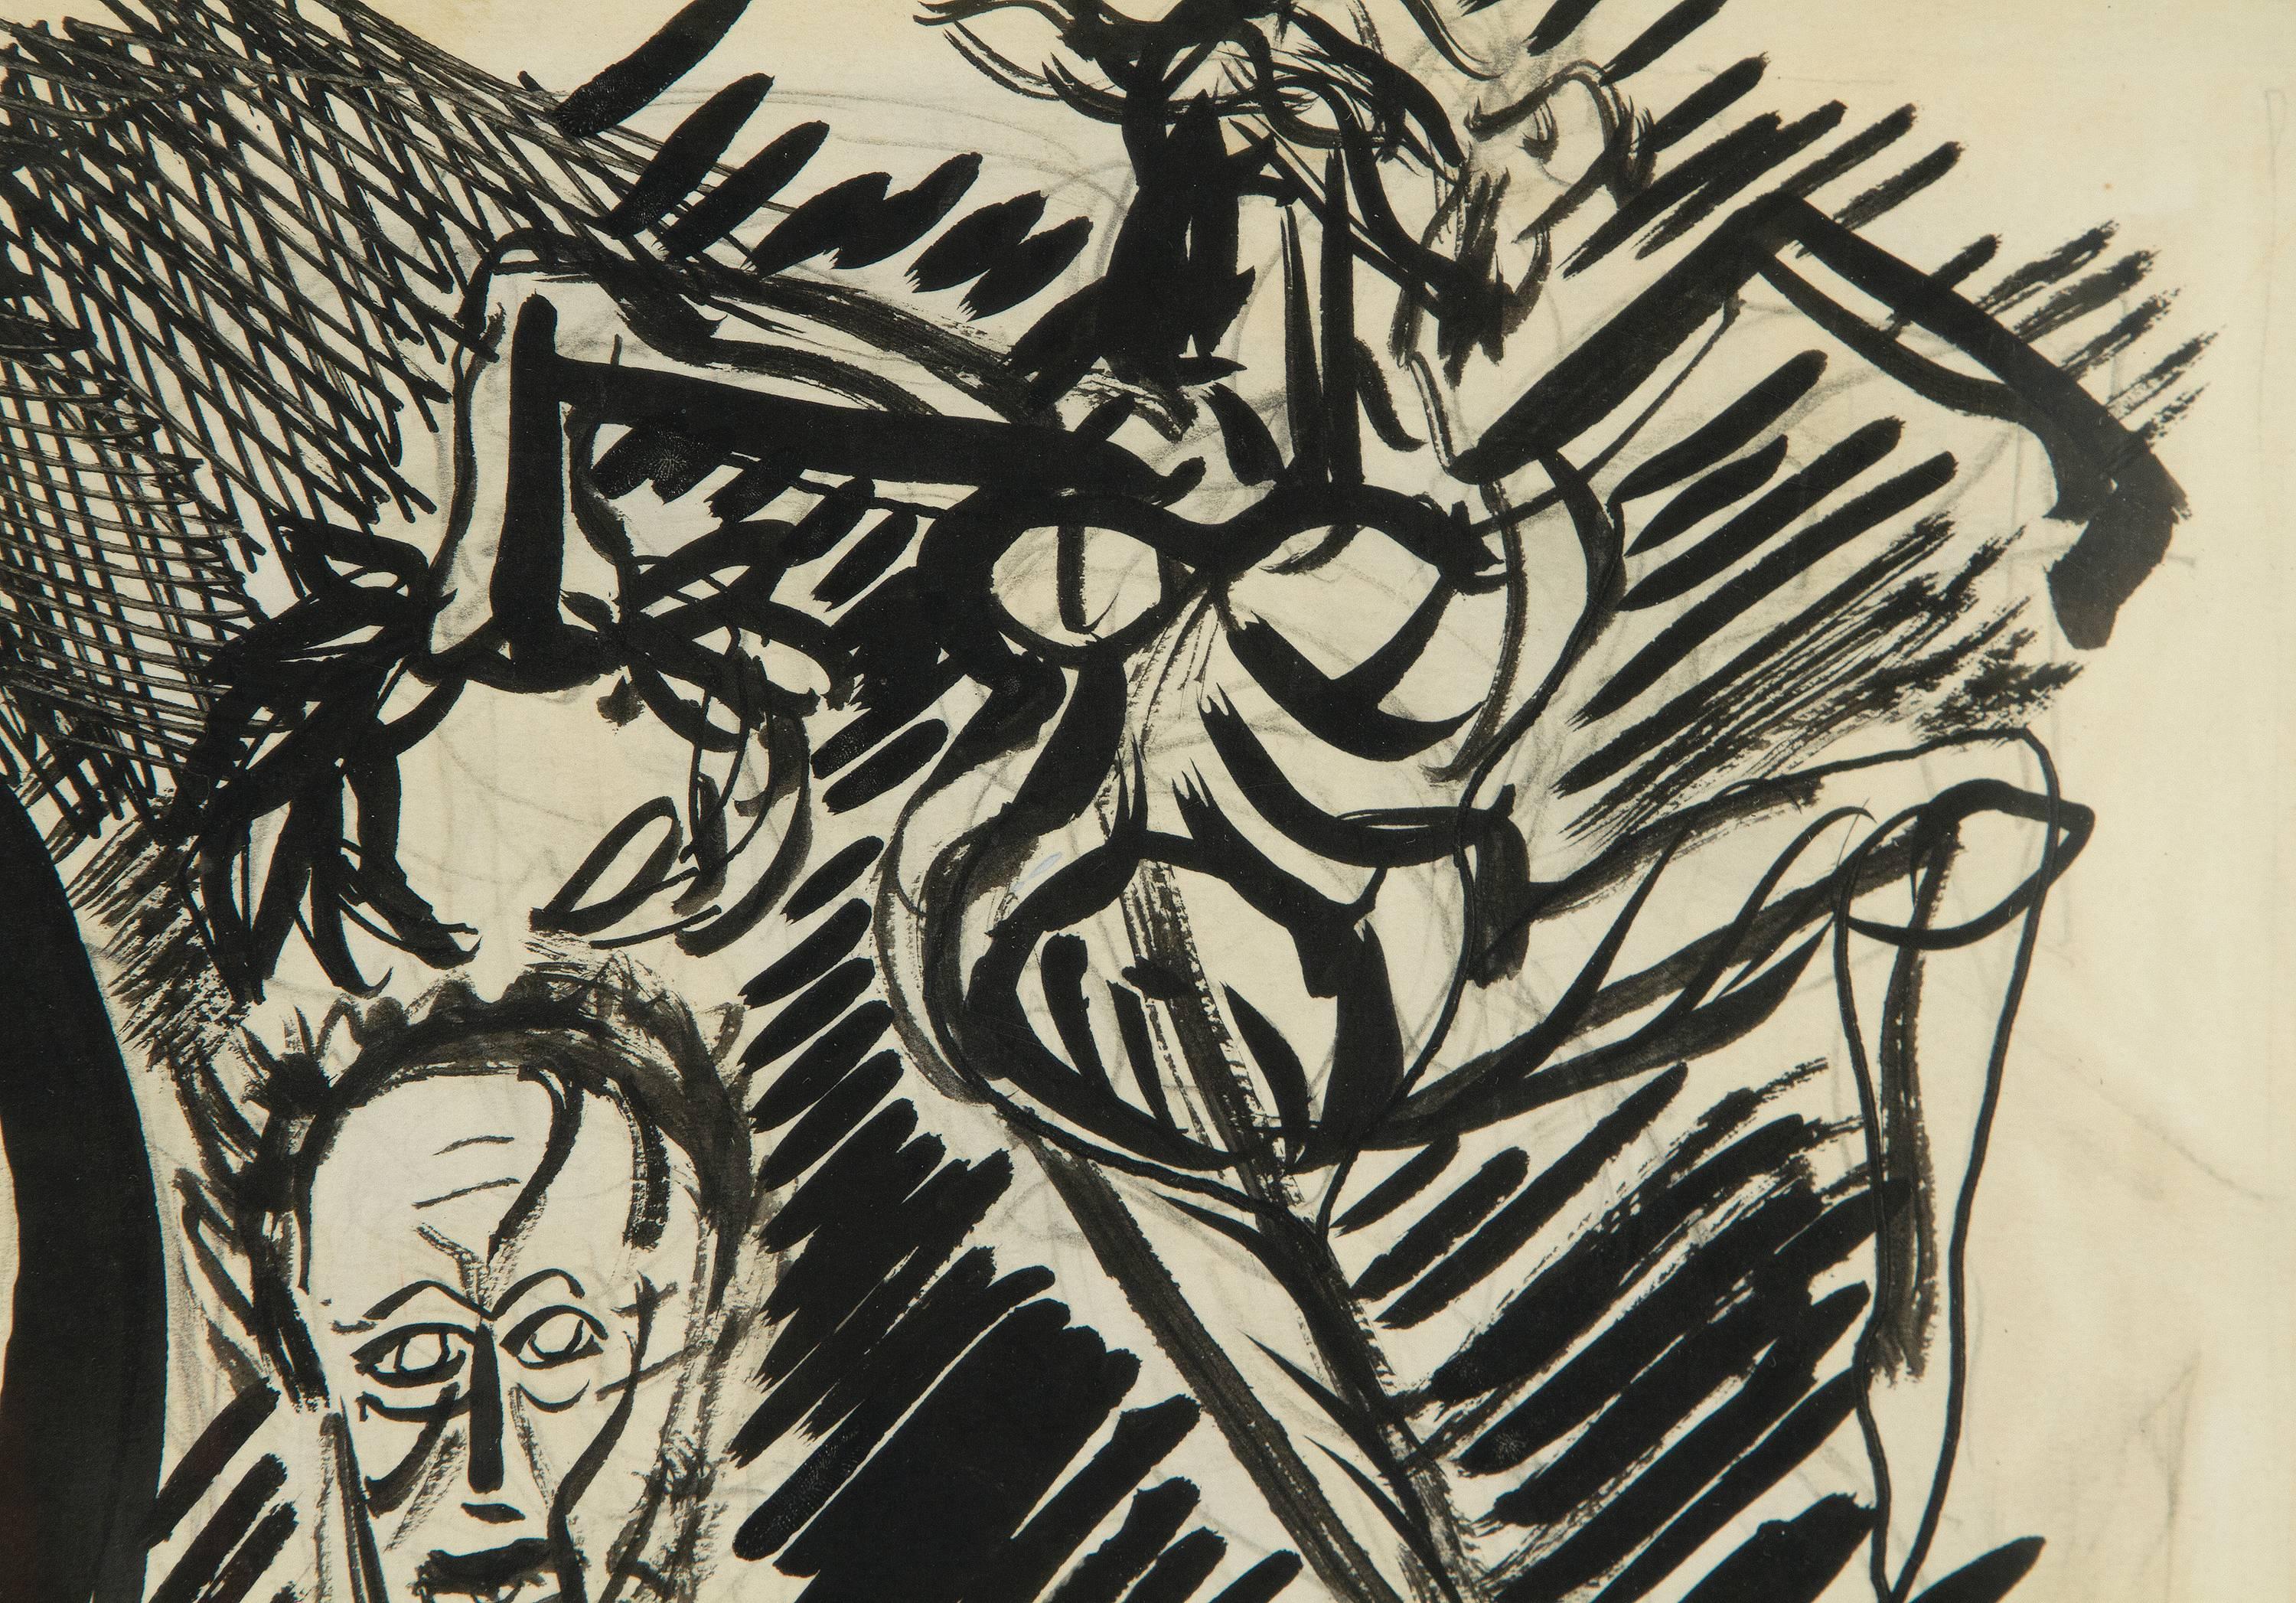 An ink on paper by Jose Clemente Orozco. This work on paper depicts a soldier or horseback, sword in hand, the horse rearing as a figure dances overhead.
Signed  lower right, “J.C. Orozco”.

José Clemente Orozco was a Mexican social realist